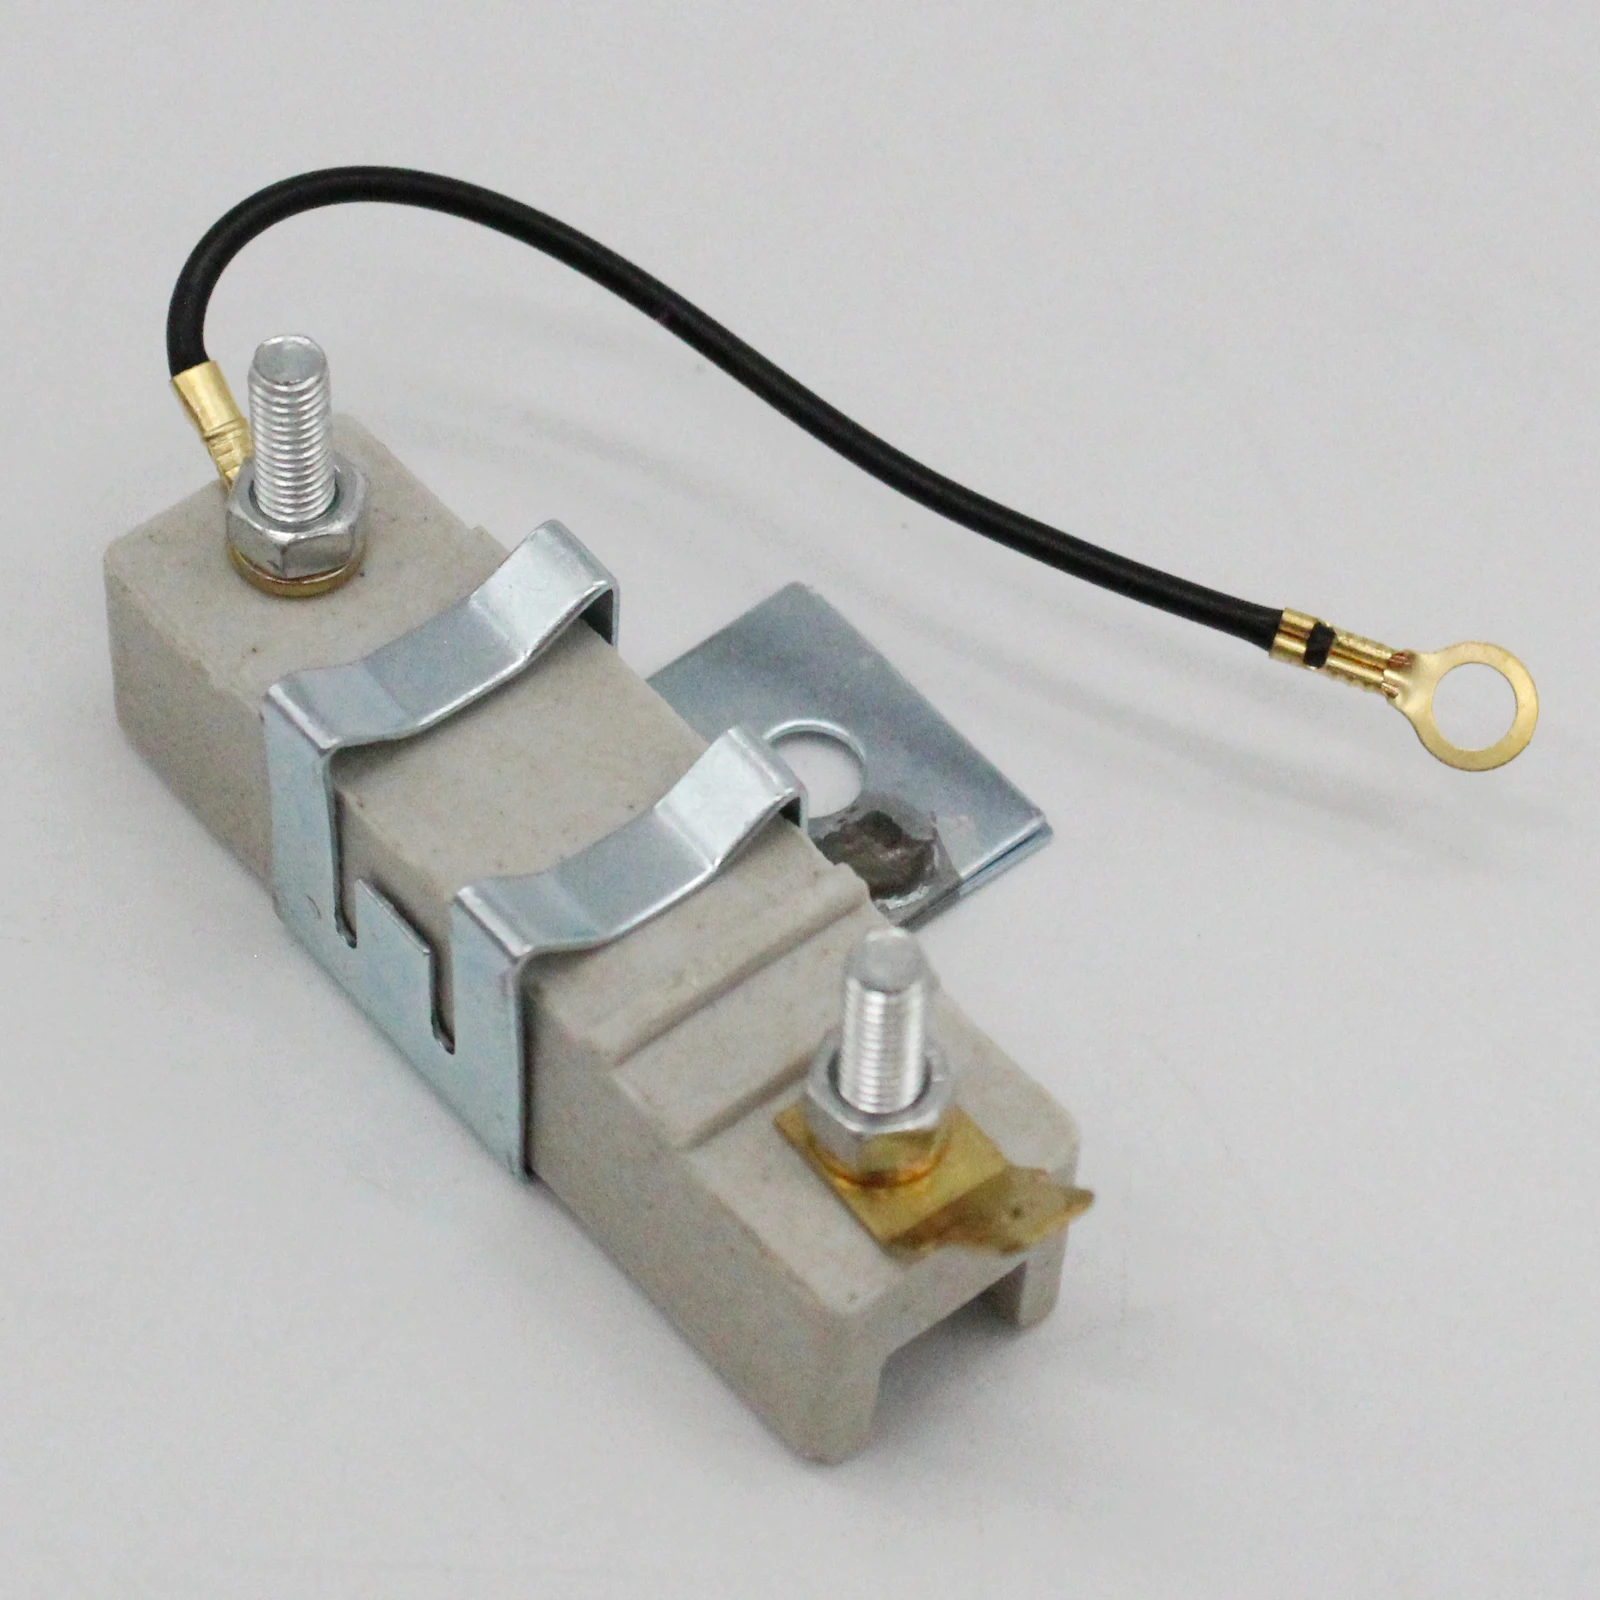 Cars Metal Oil Immersed Coil Resistor, Ballast Resistor, Use with A 1.5 Ohms Ballast Coil, Durable Car Accessory